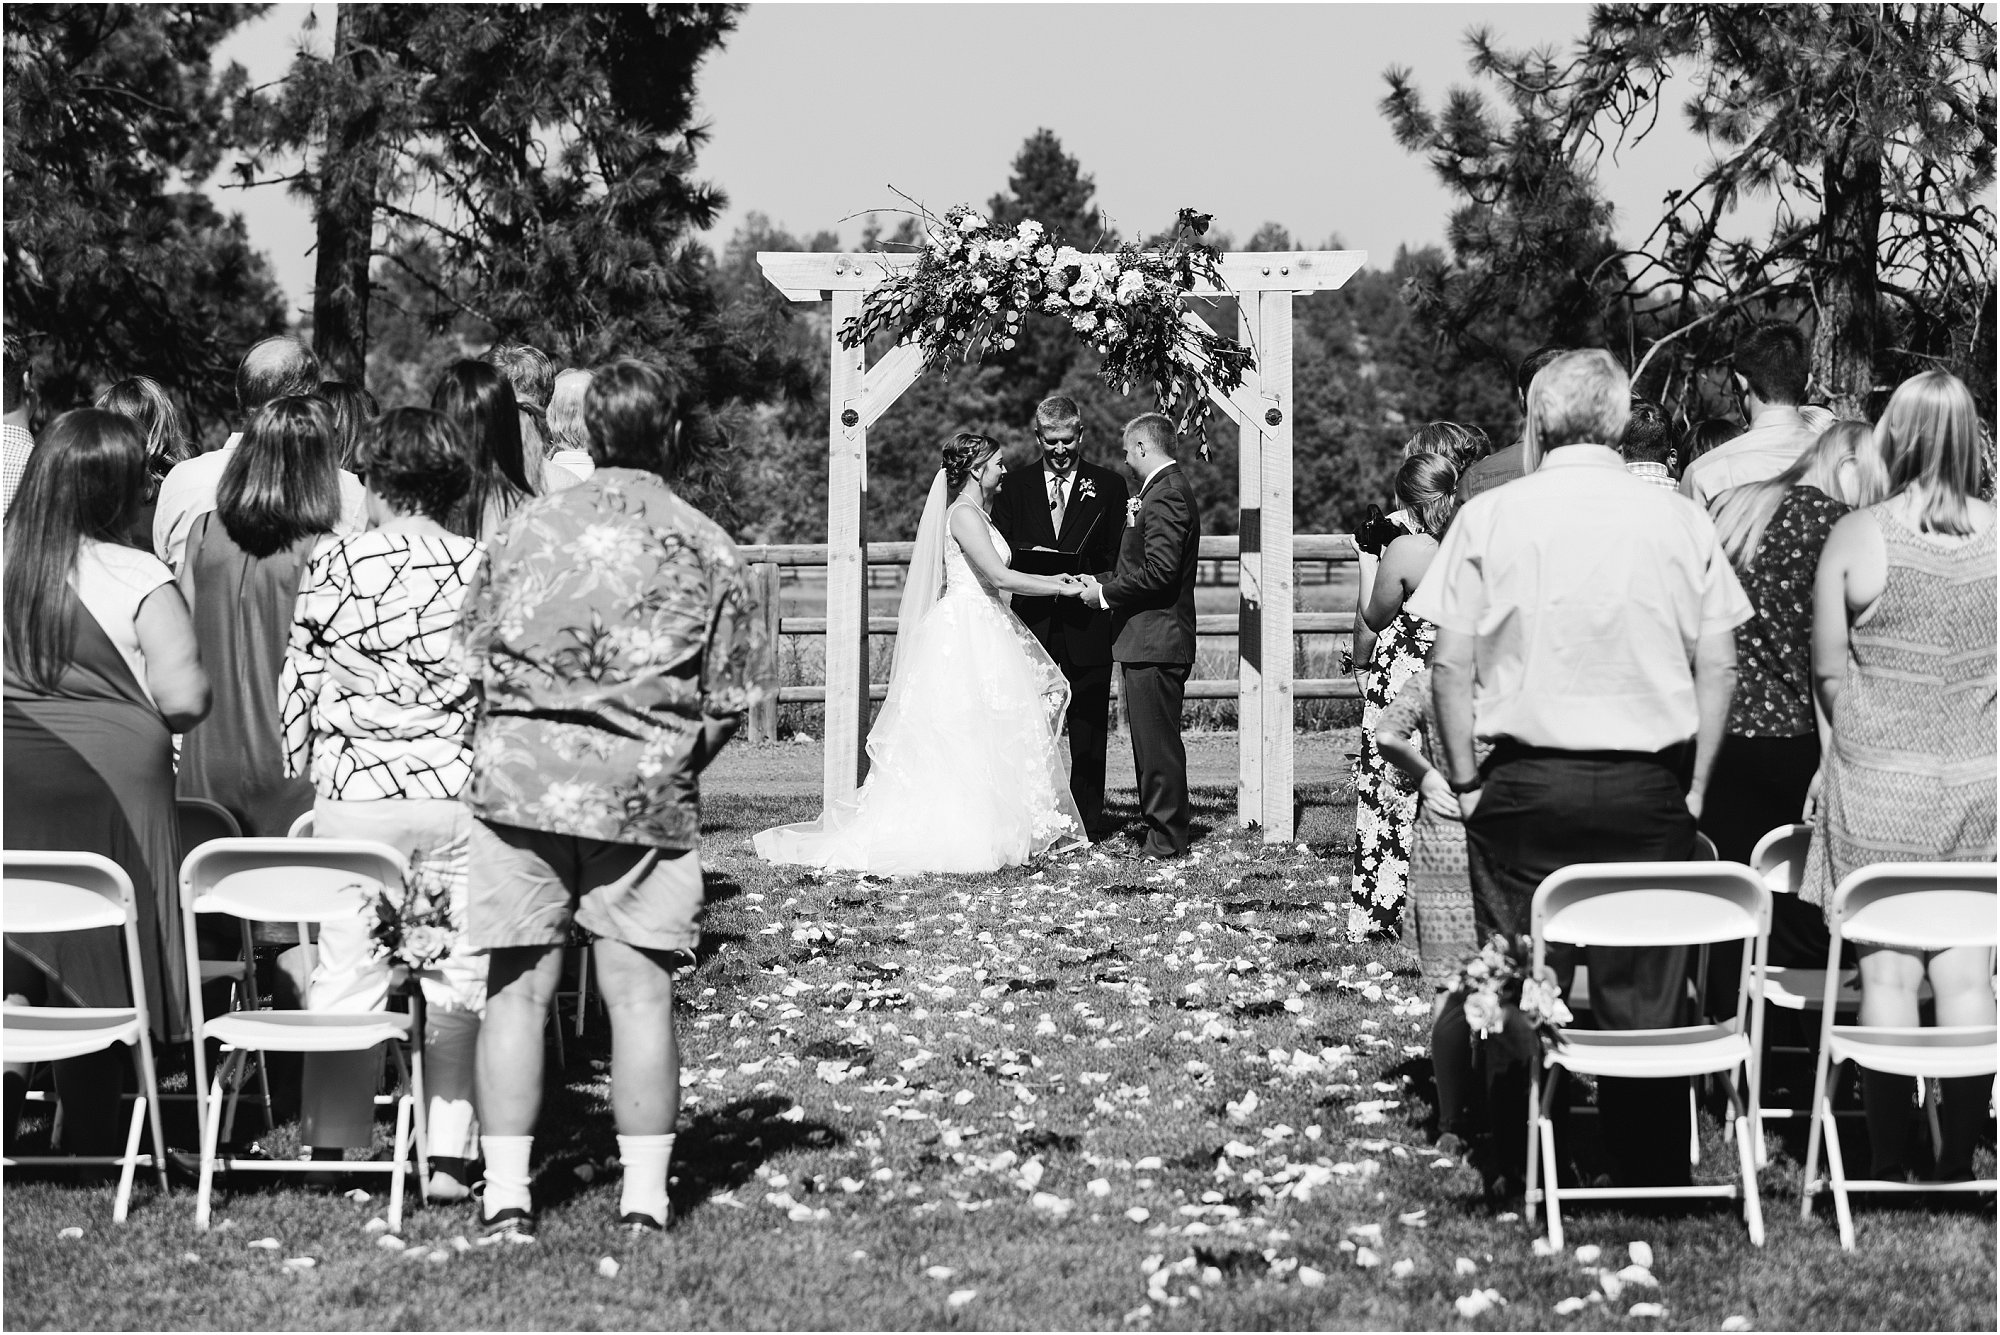 A beautiful black and white photograph of the bride and groom standing at the flower draped wedding arch during their outdoor ceremony at Rock Springs Ranch in Bend, OR. | Erica Swantek Photography